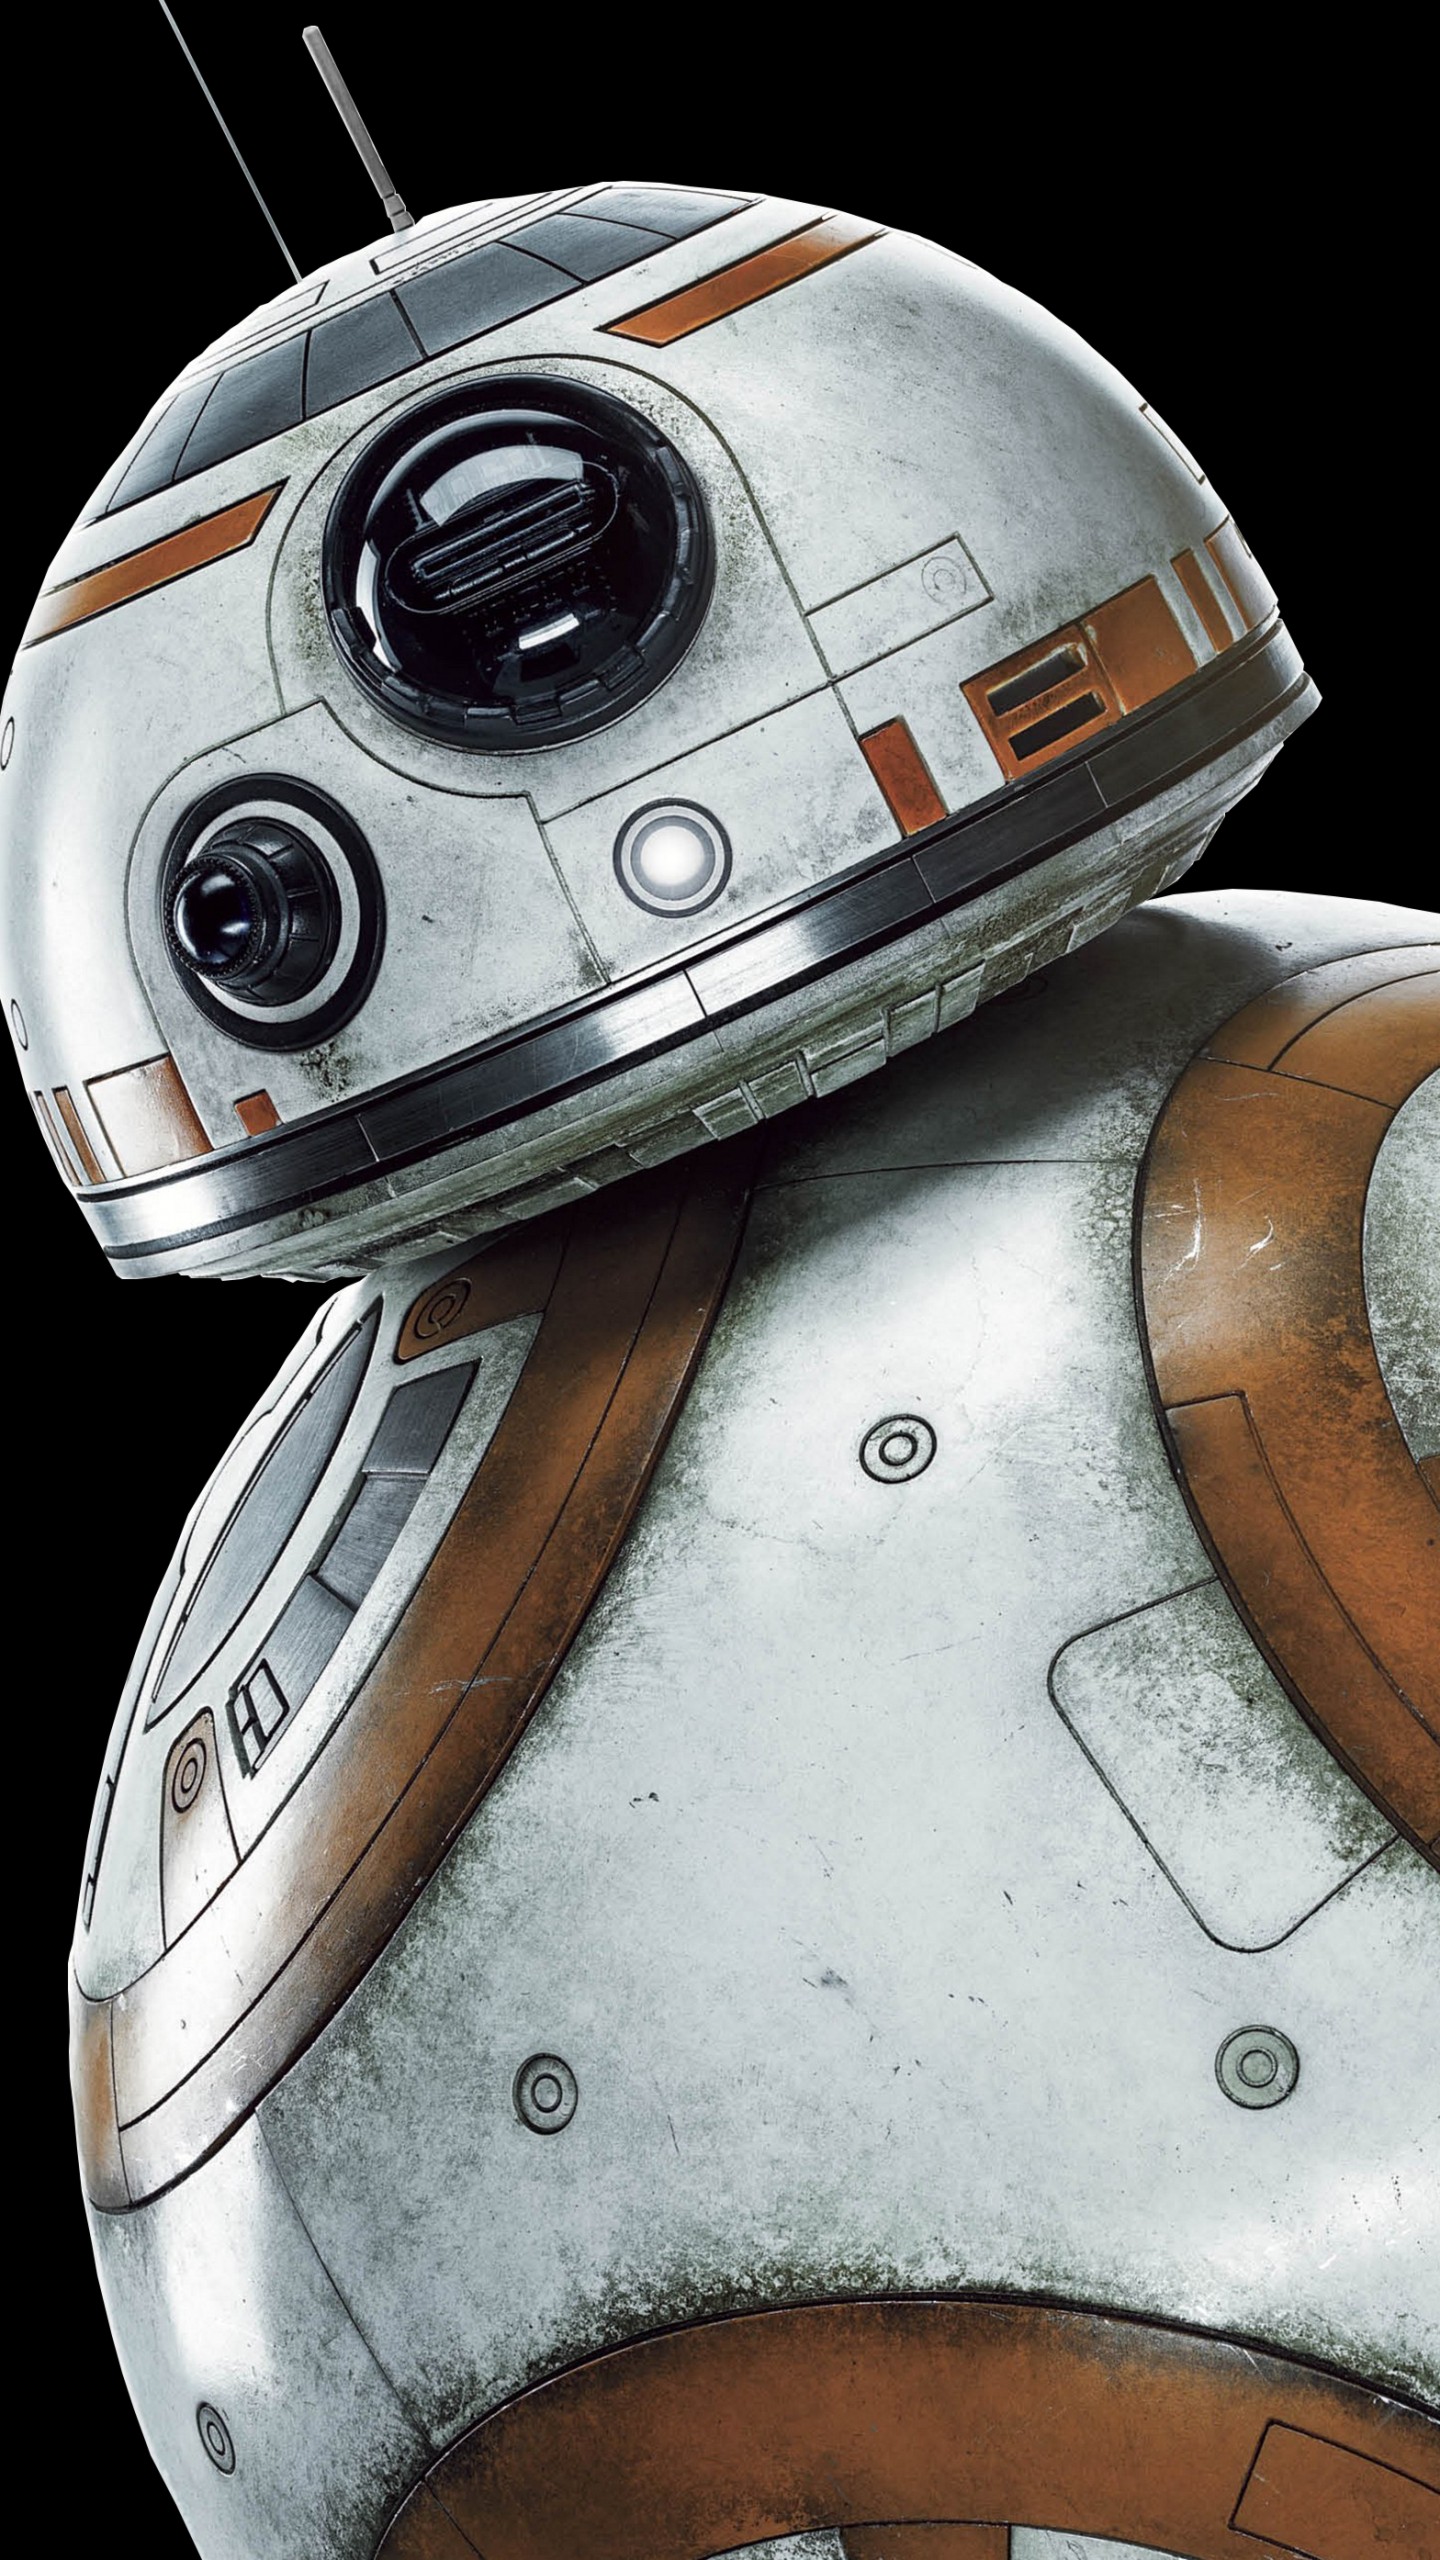 Download Bb 8 Instruction Manual, Bb 8 In Real Life - Bb 8 Pc , HD Wallpaper & Backgrounds